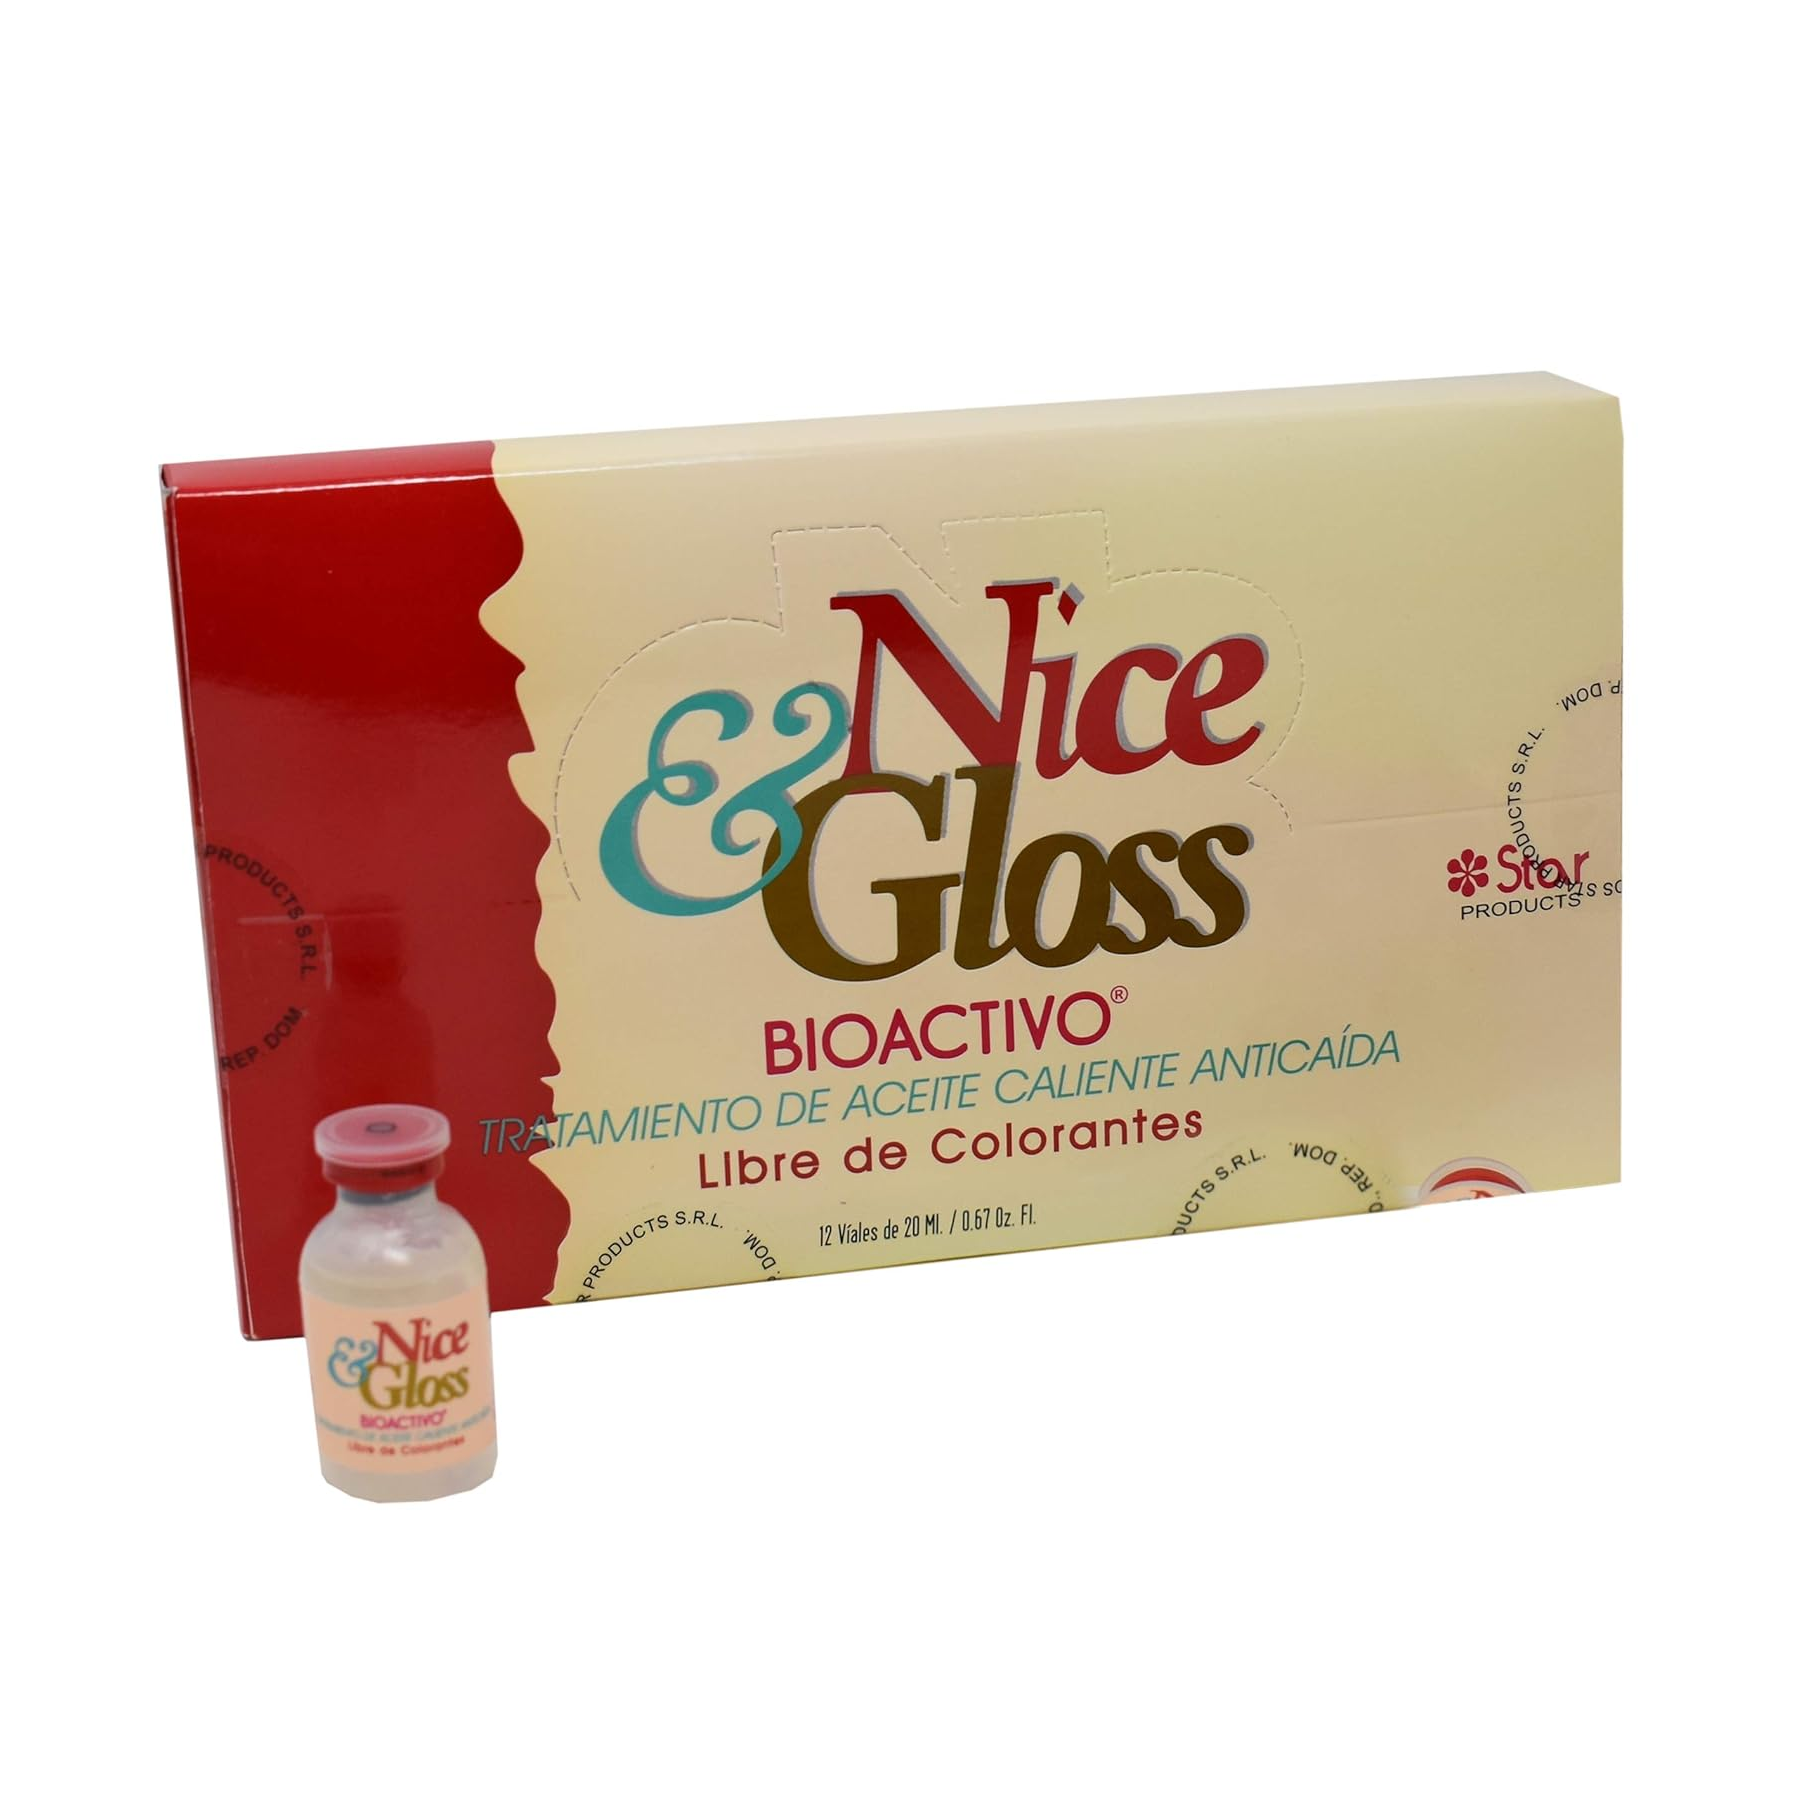 Star Products Nice & Gloss 0.67 oz Ampoule 12/1